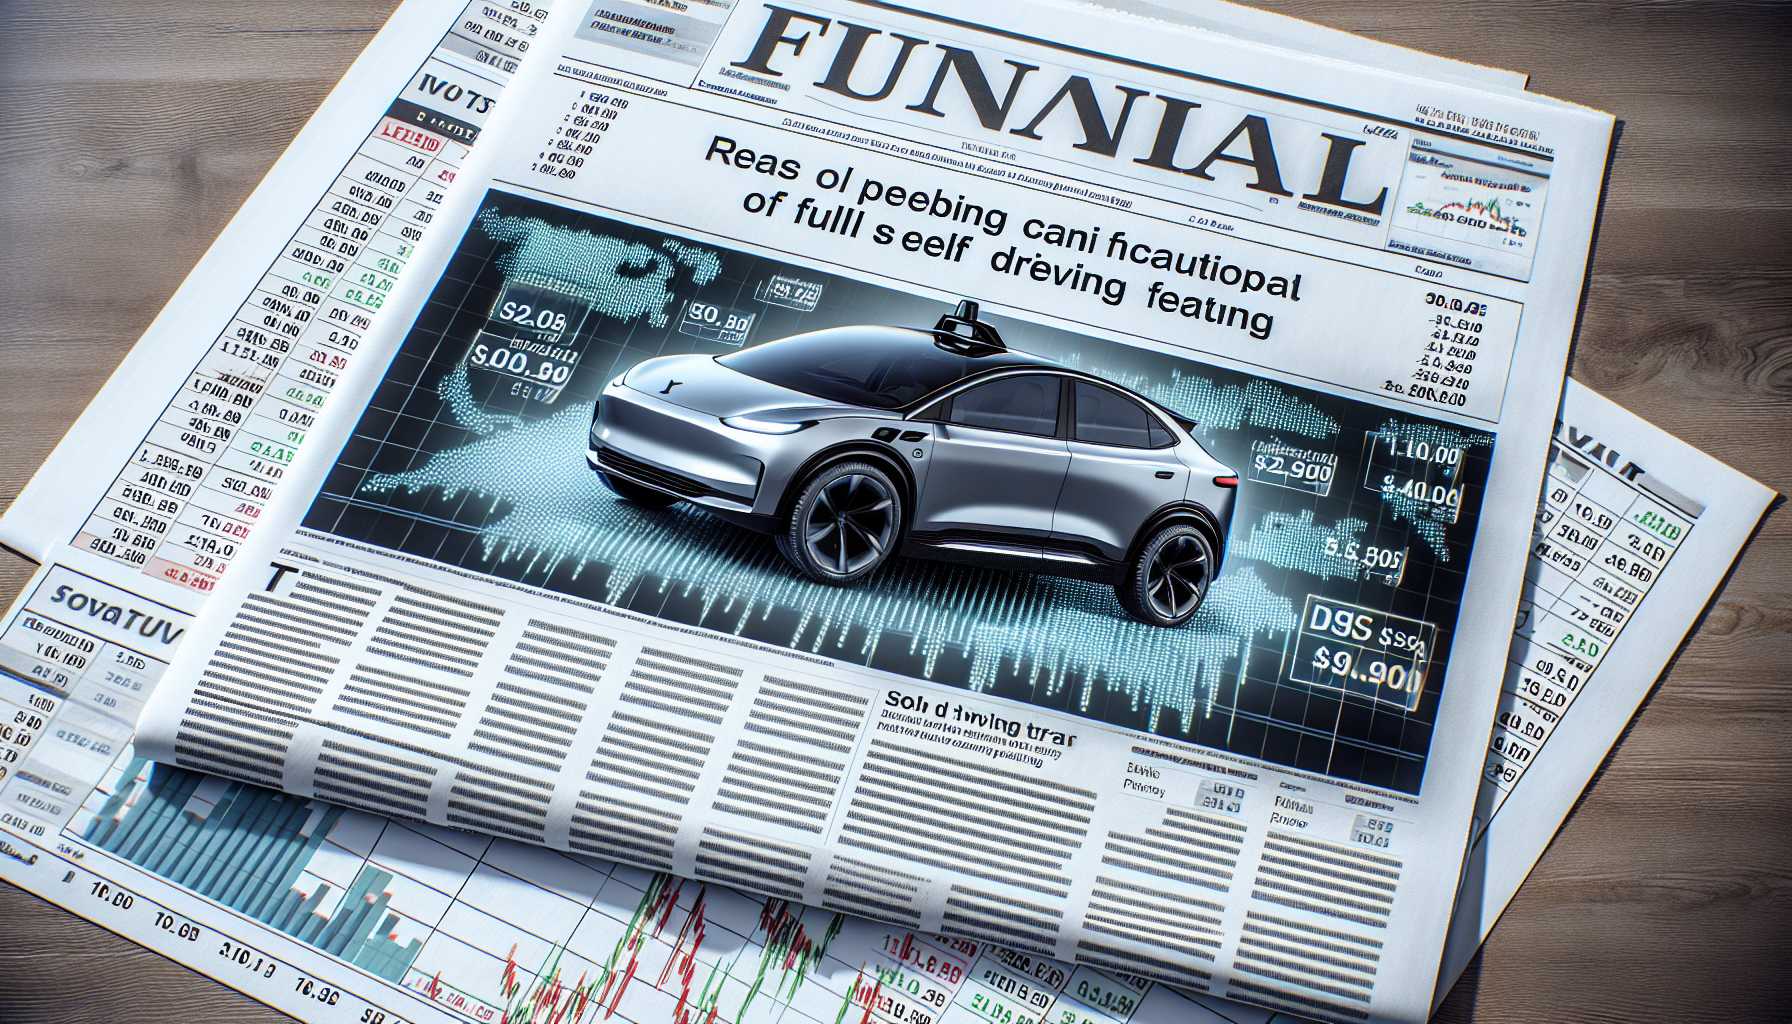 Tesla car with price tags showing Full Self Driving feature in financial newspaper